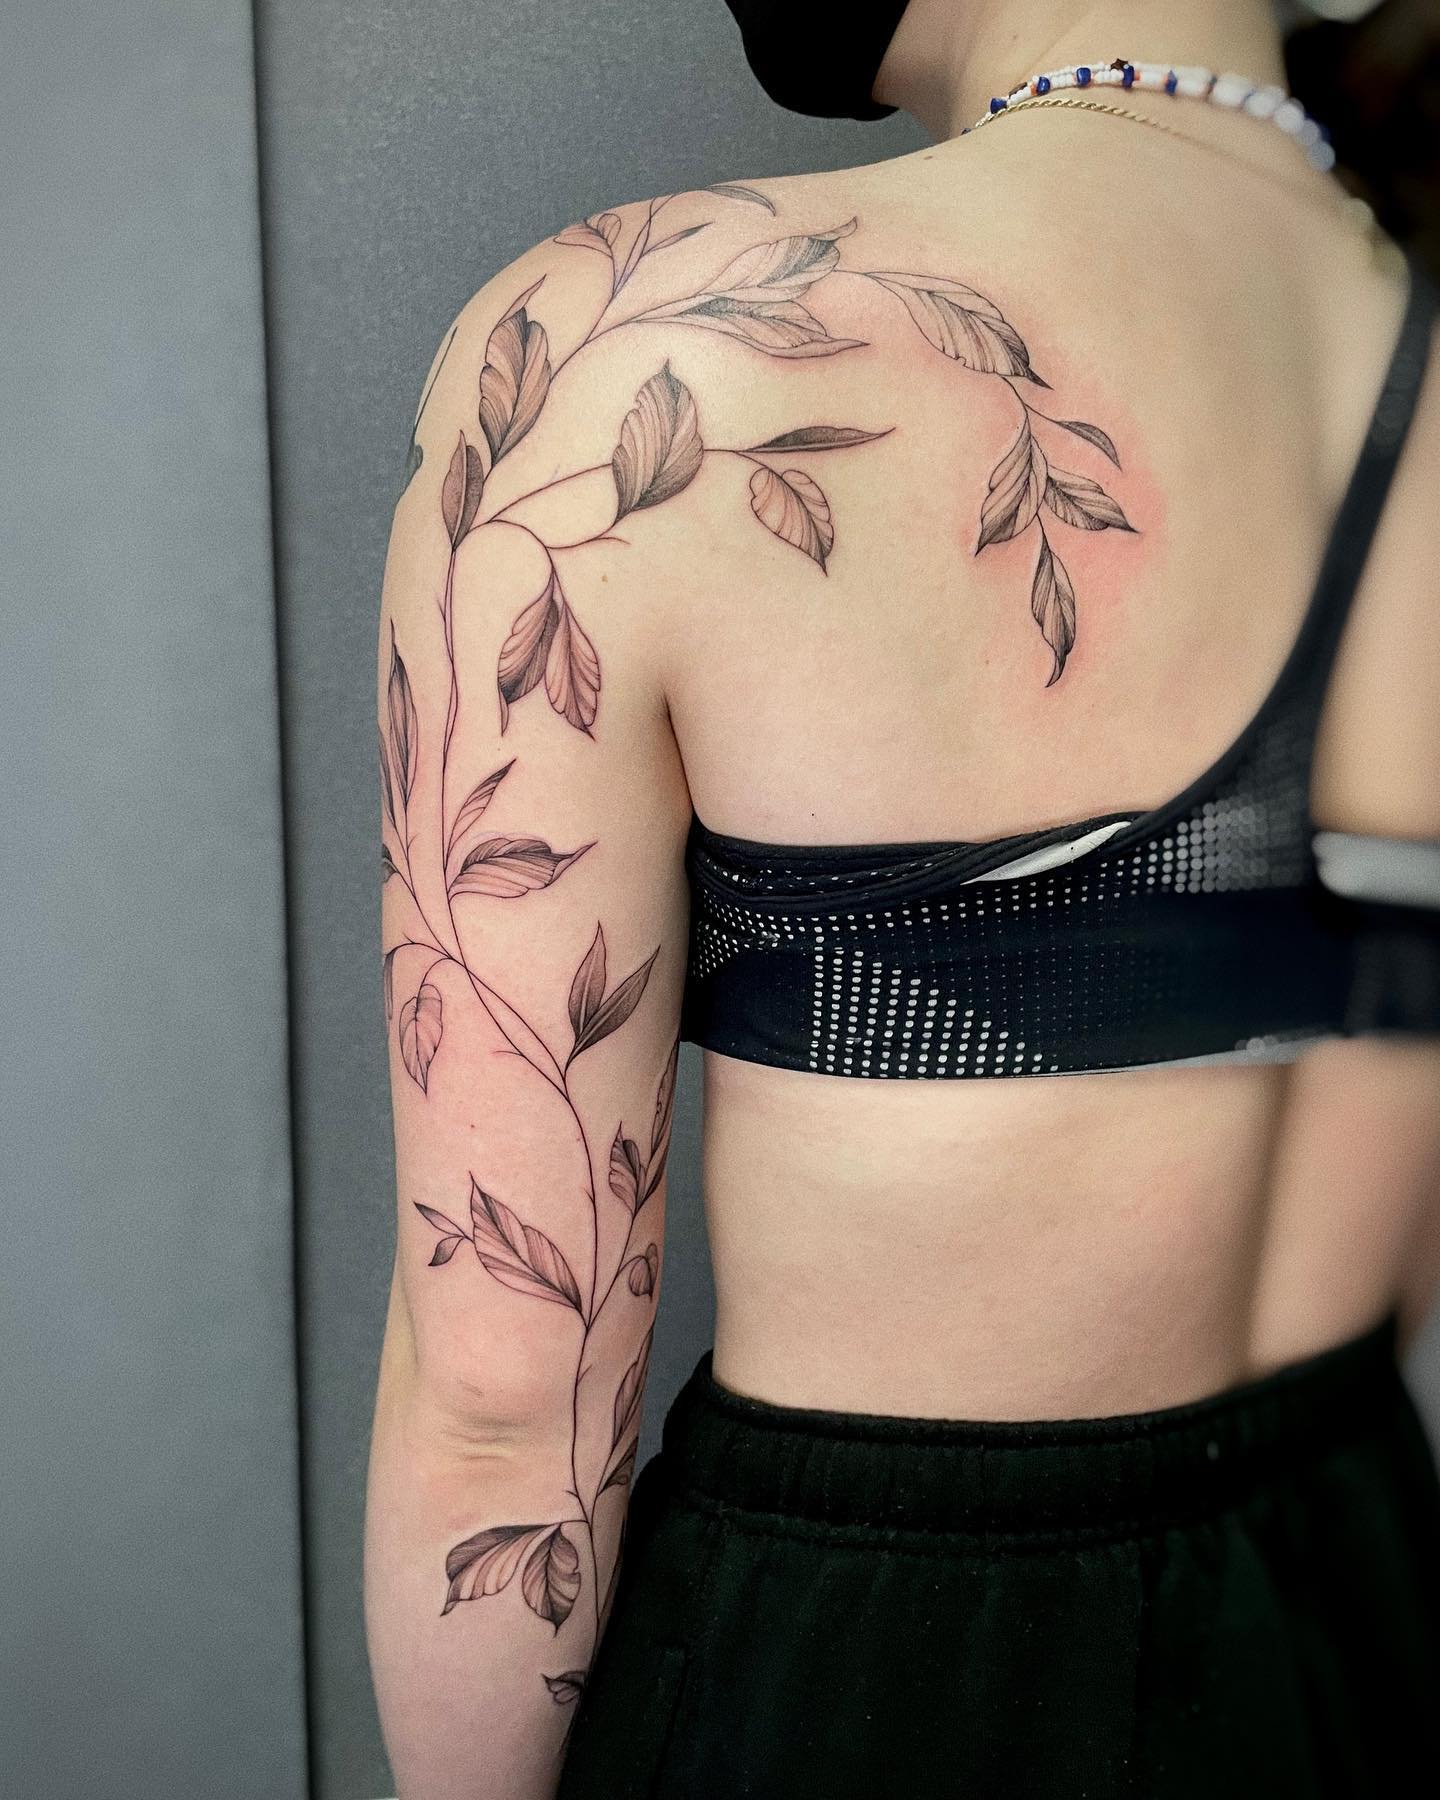 Wanna cover all of your arm from bottom to top with leaves? This leaf tattoo will take your upper arm to a different level. Are you ready for a change?